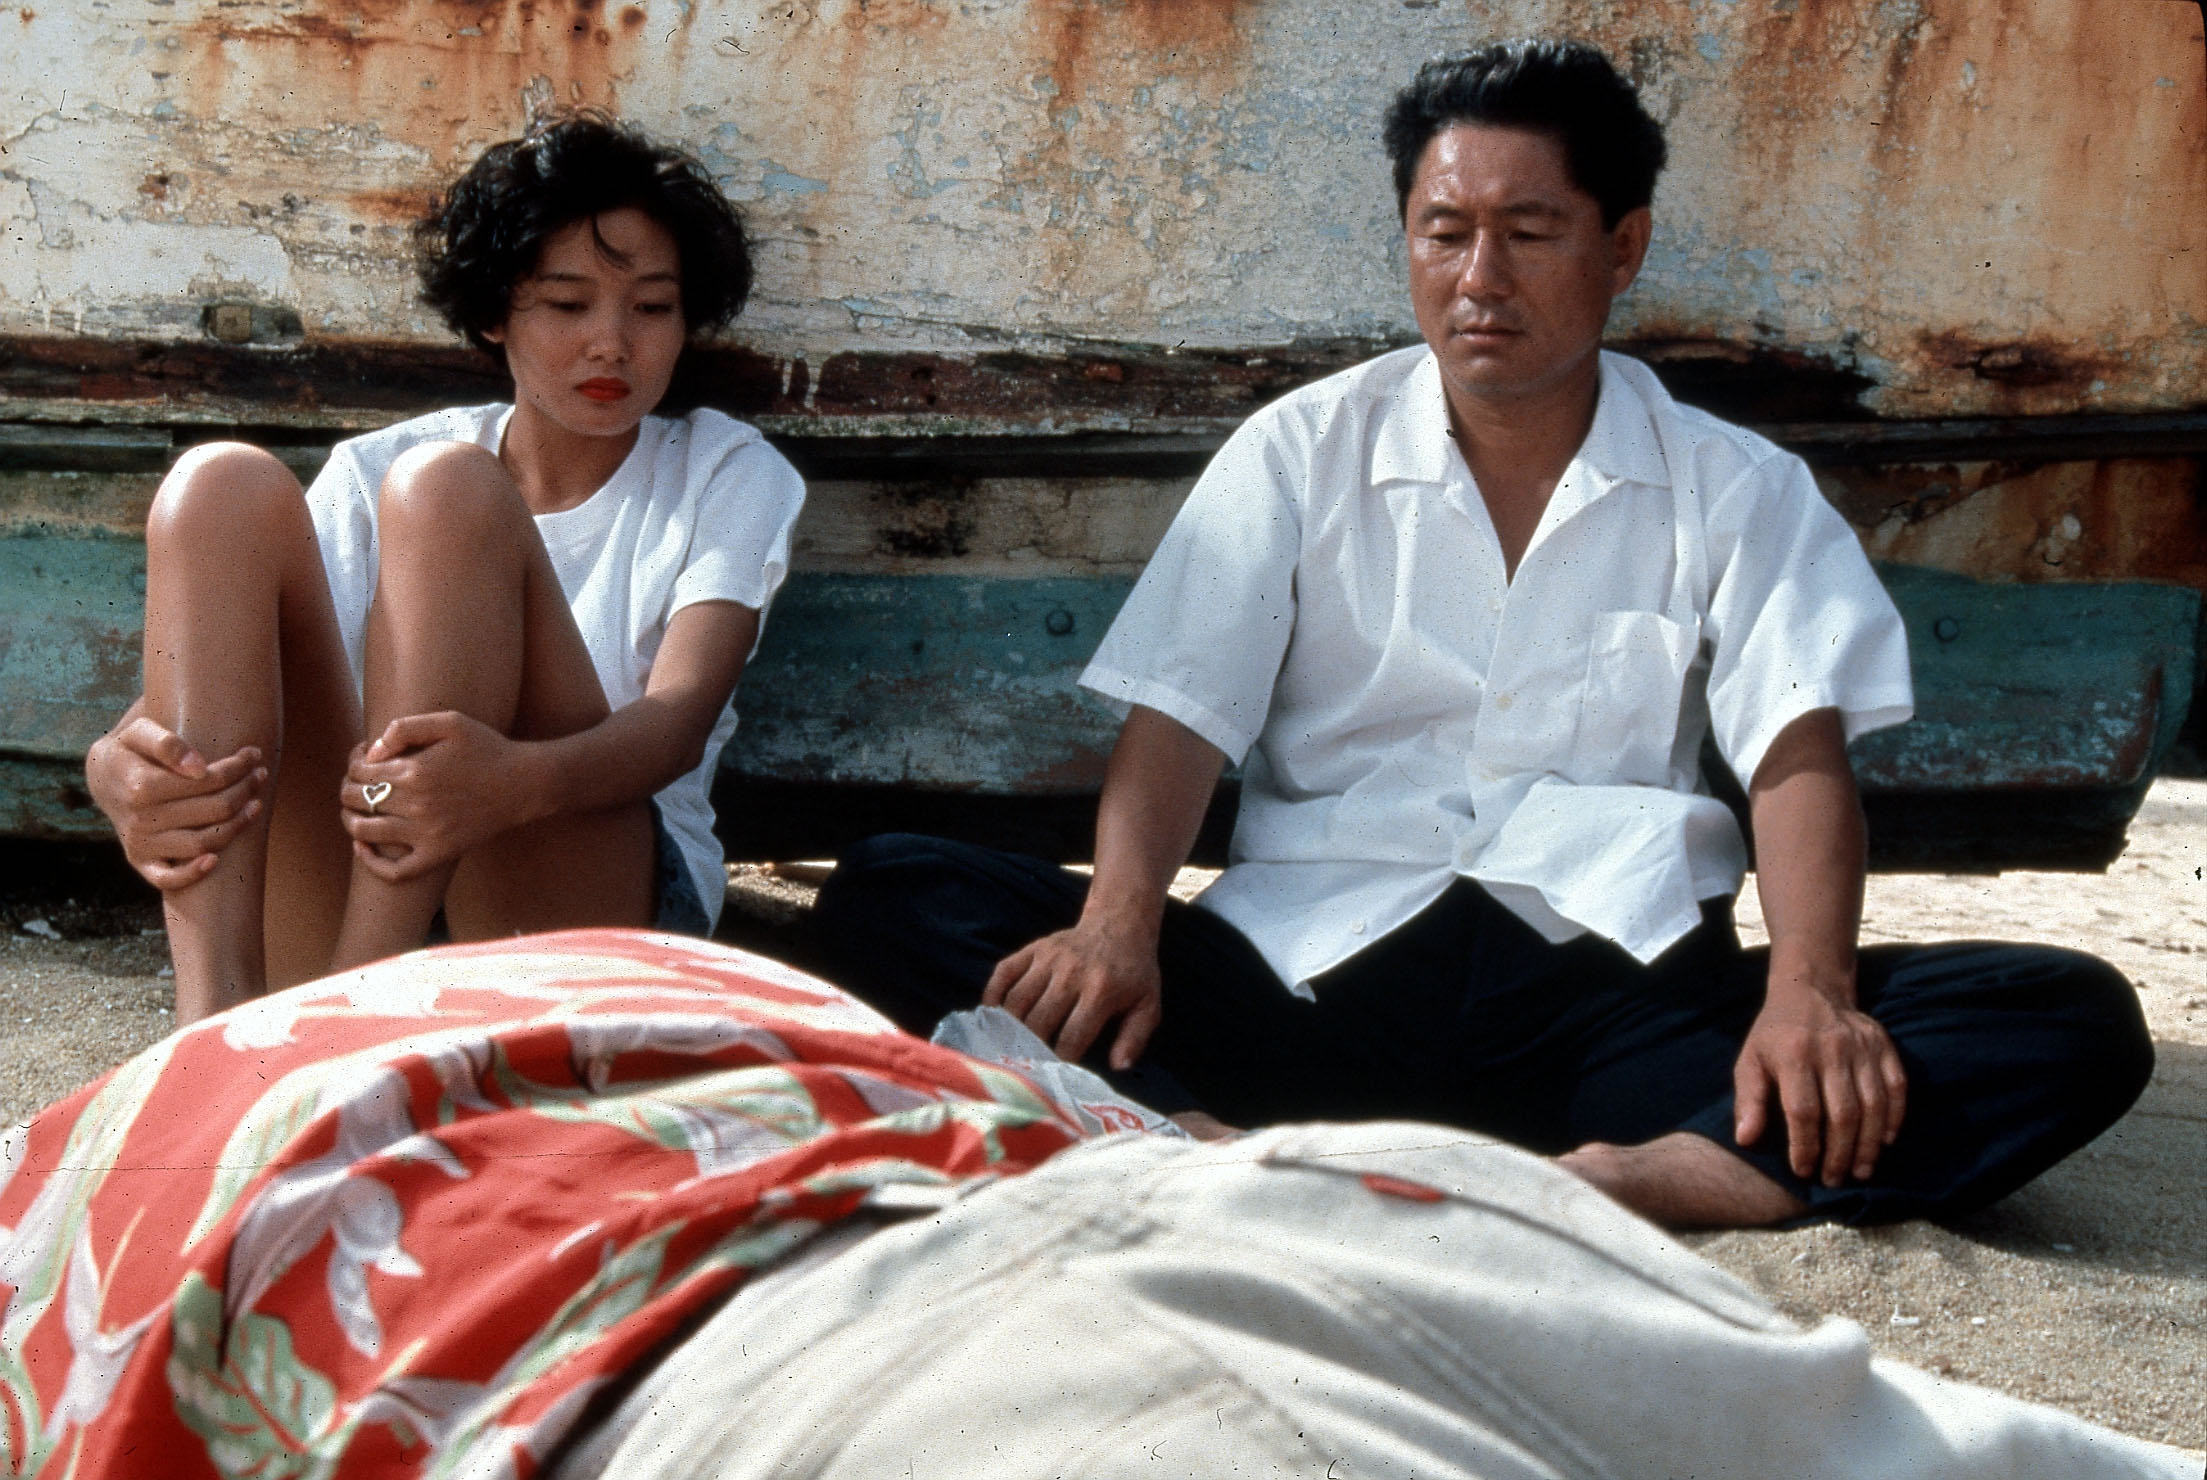 A gangster and his girlfriend observe a dead body near a decrepit boat